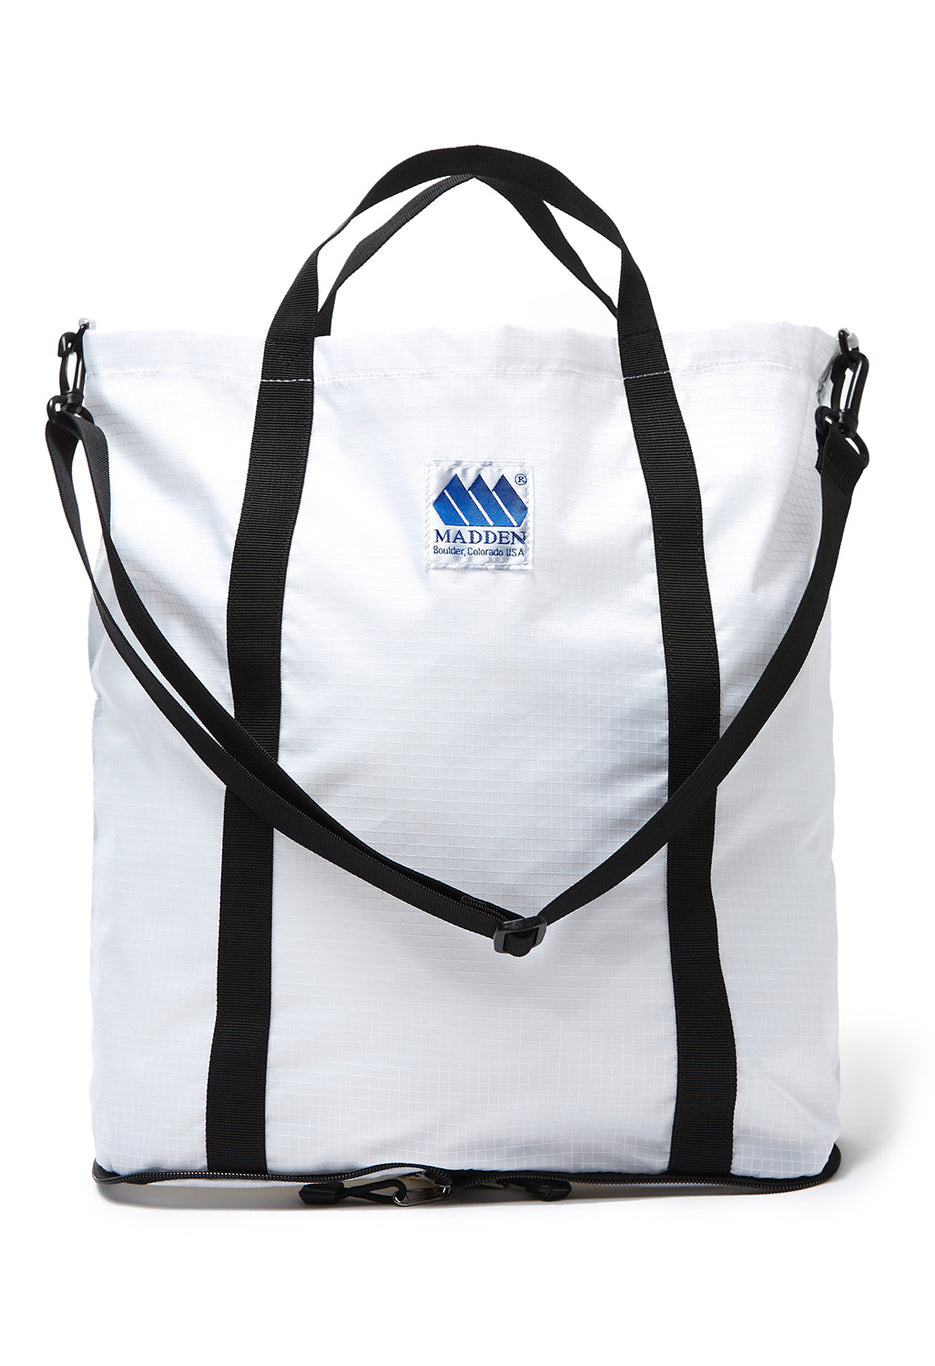 Madden Equipment Funny Tote Pack - White Ripstop